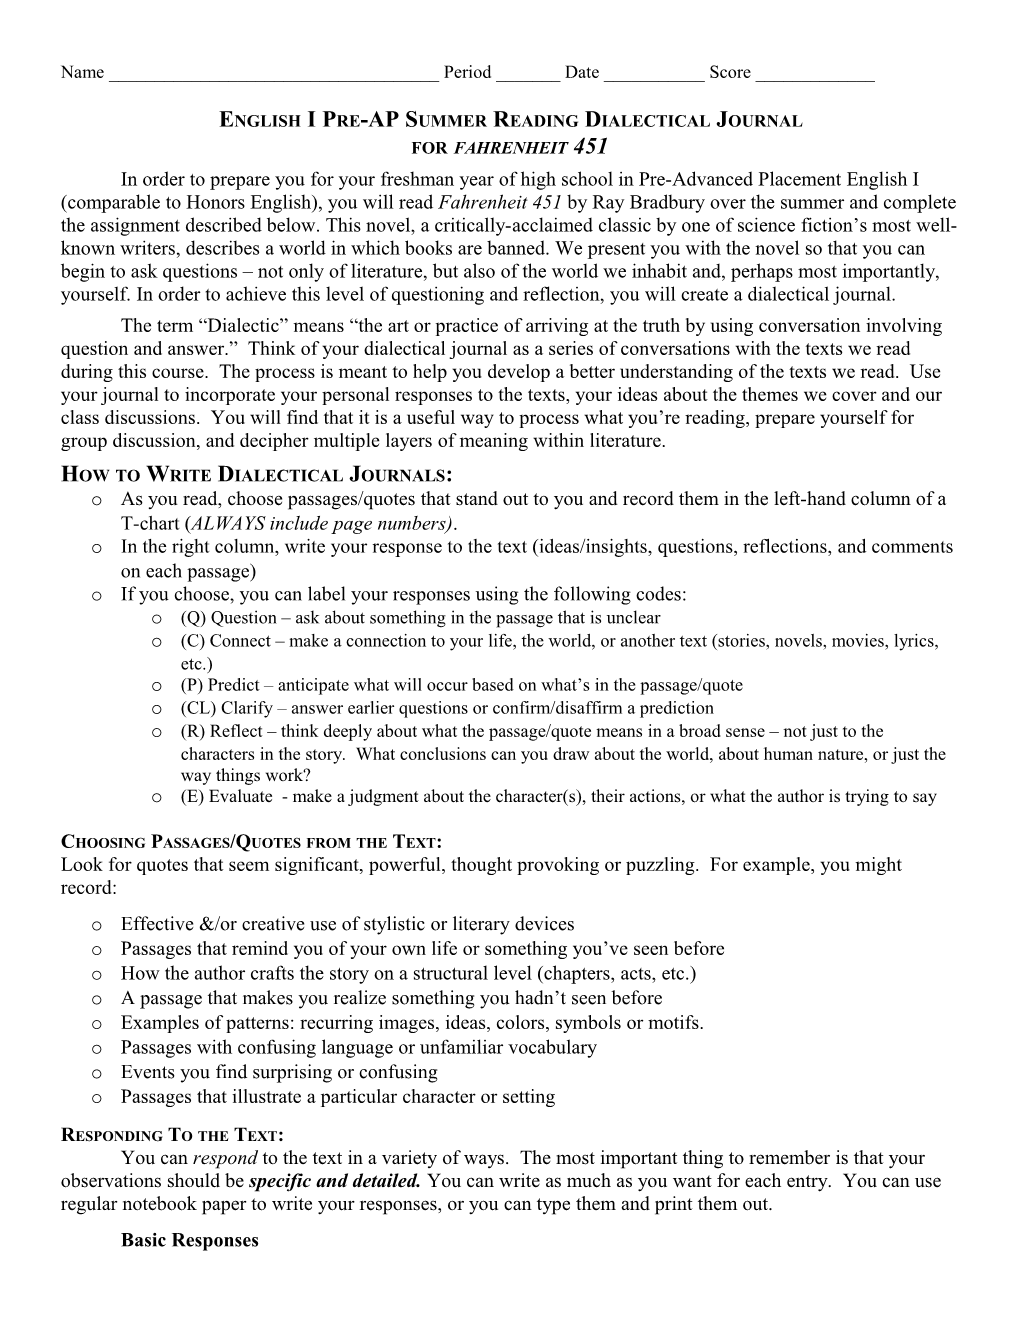 English Ipre-AP Summer Reading Dialectical Journal